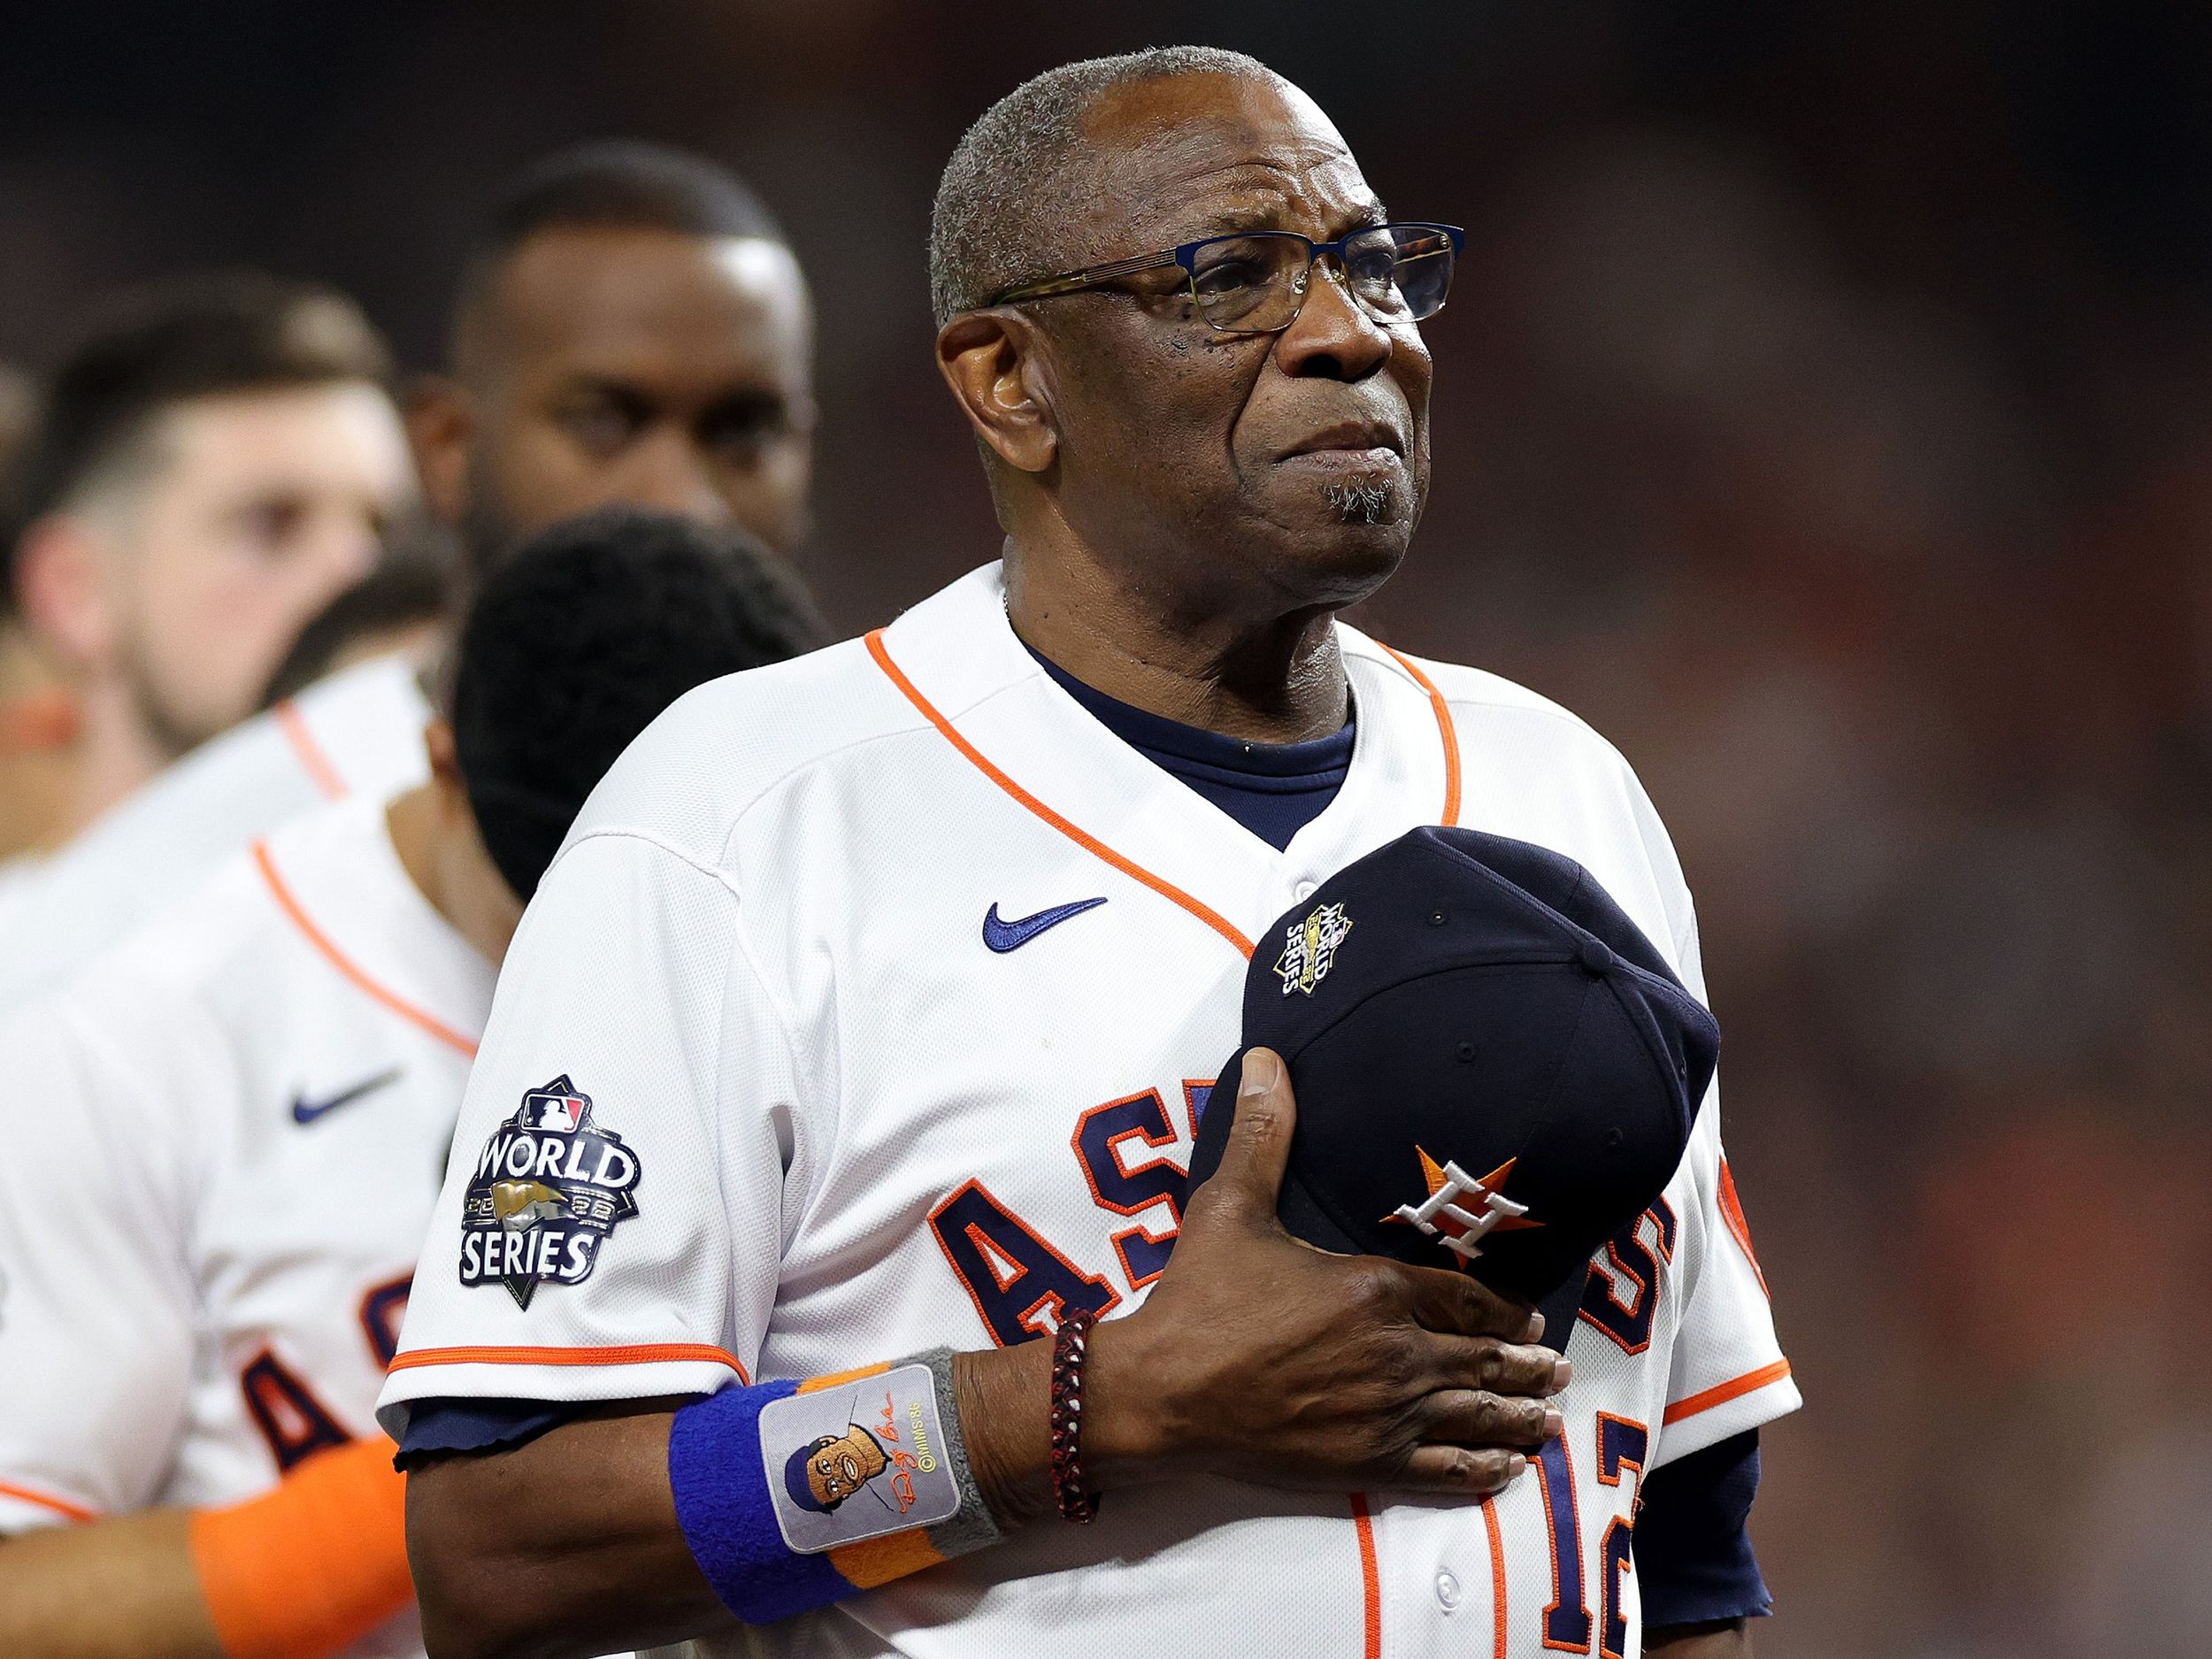 Dusty Baker has helmed another elite Astros team. He also faces